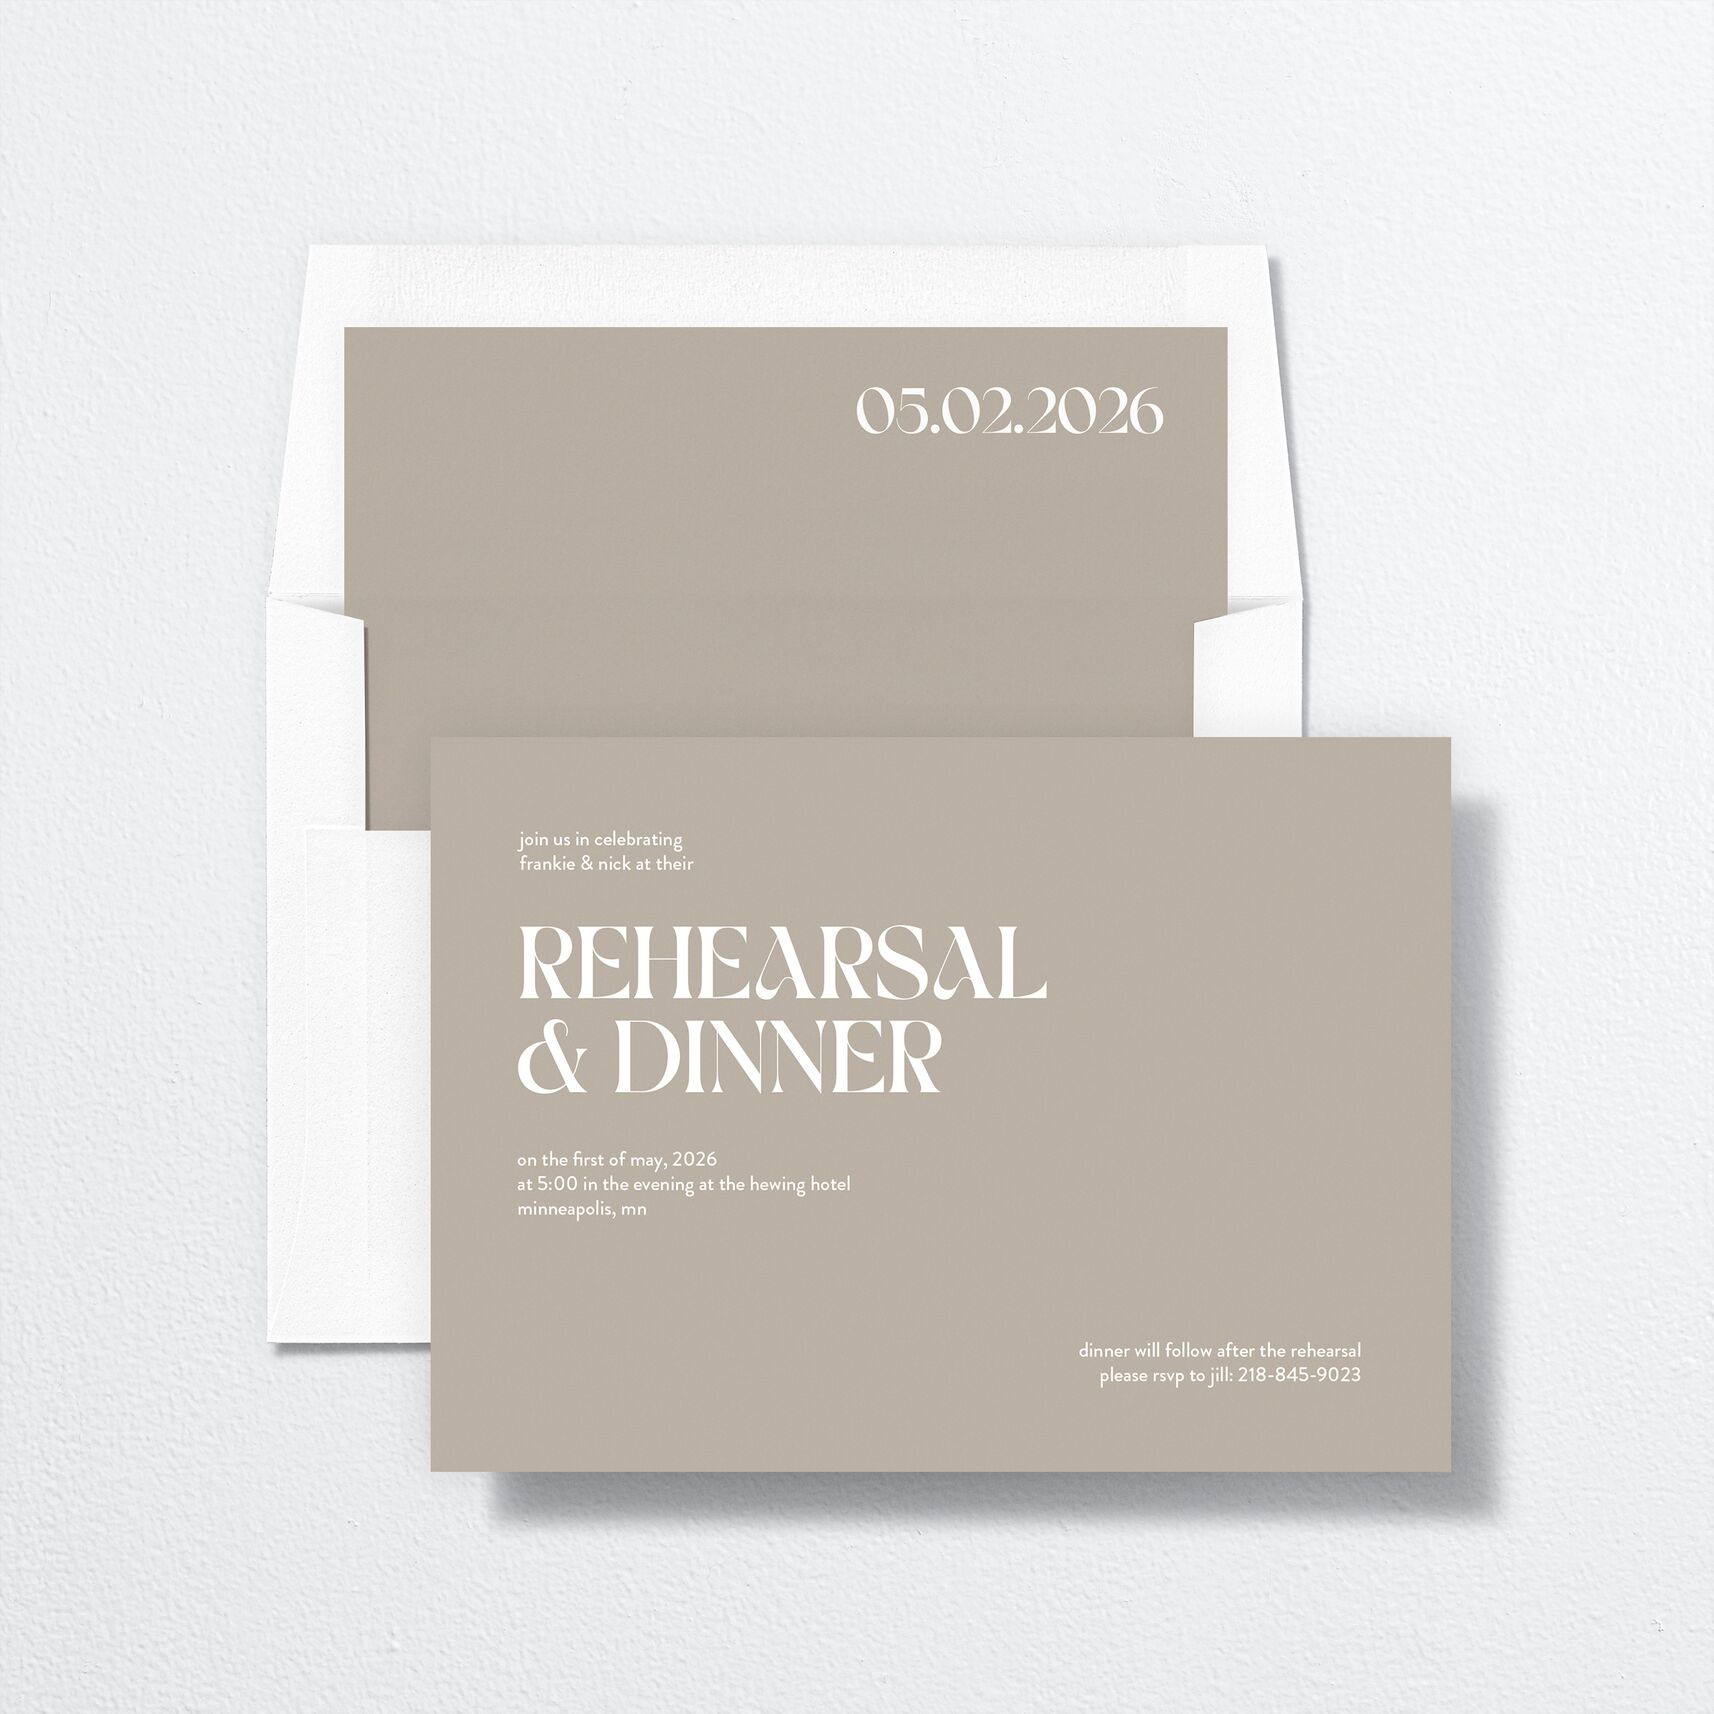 Checked Rehearsal Dinner Invitations envelope-and-liner in cream